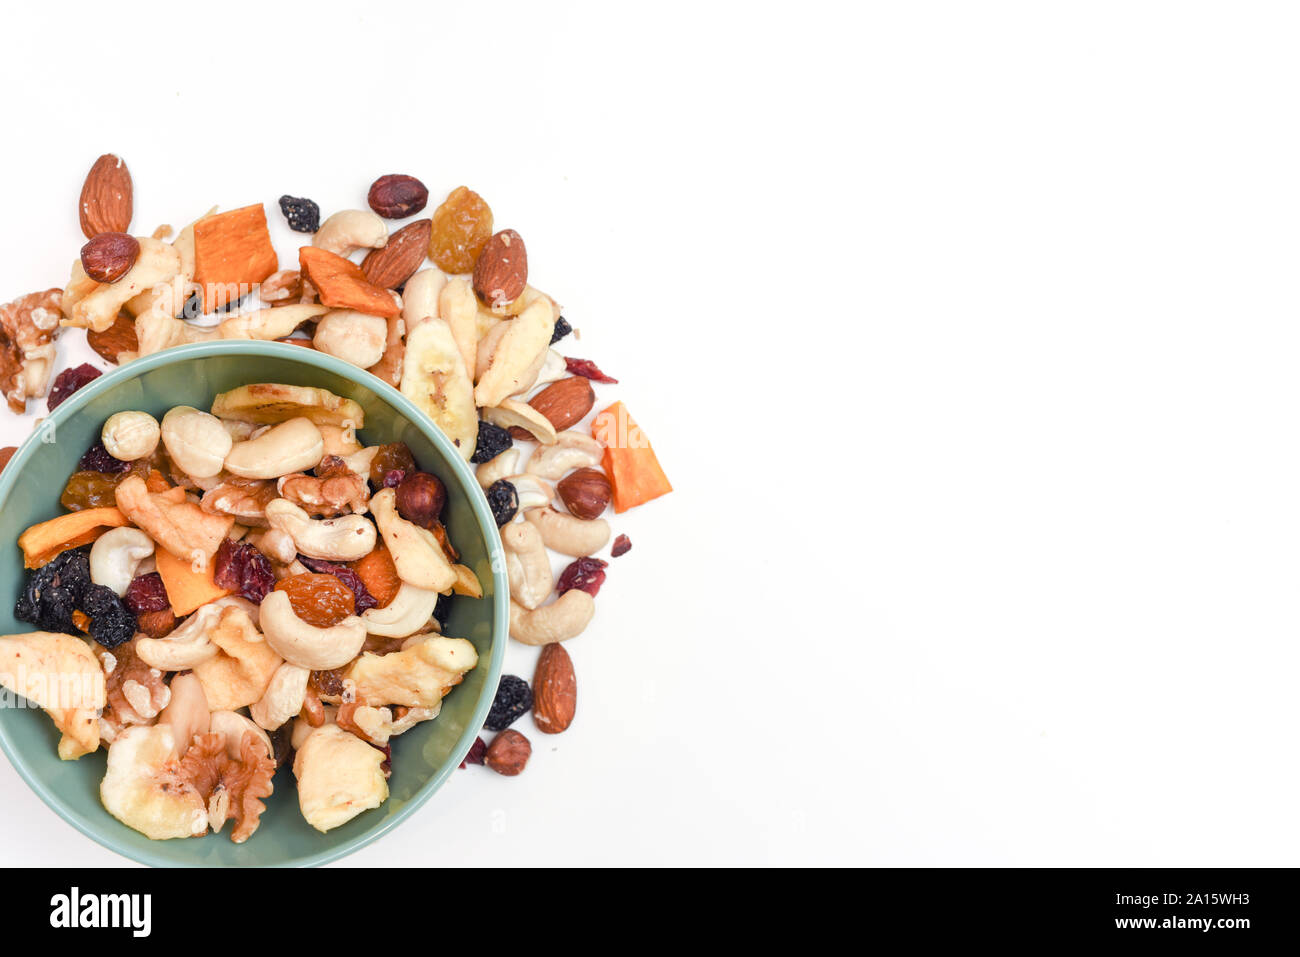 Healthy snack food trail mix of mixed nuts and dried fruits Stock Photo